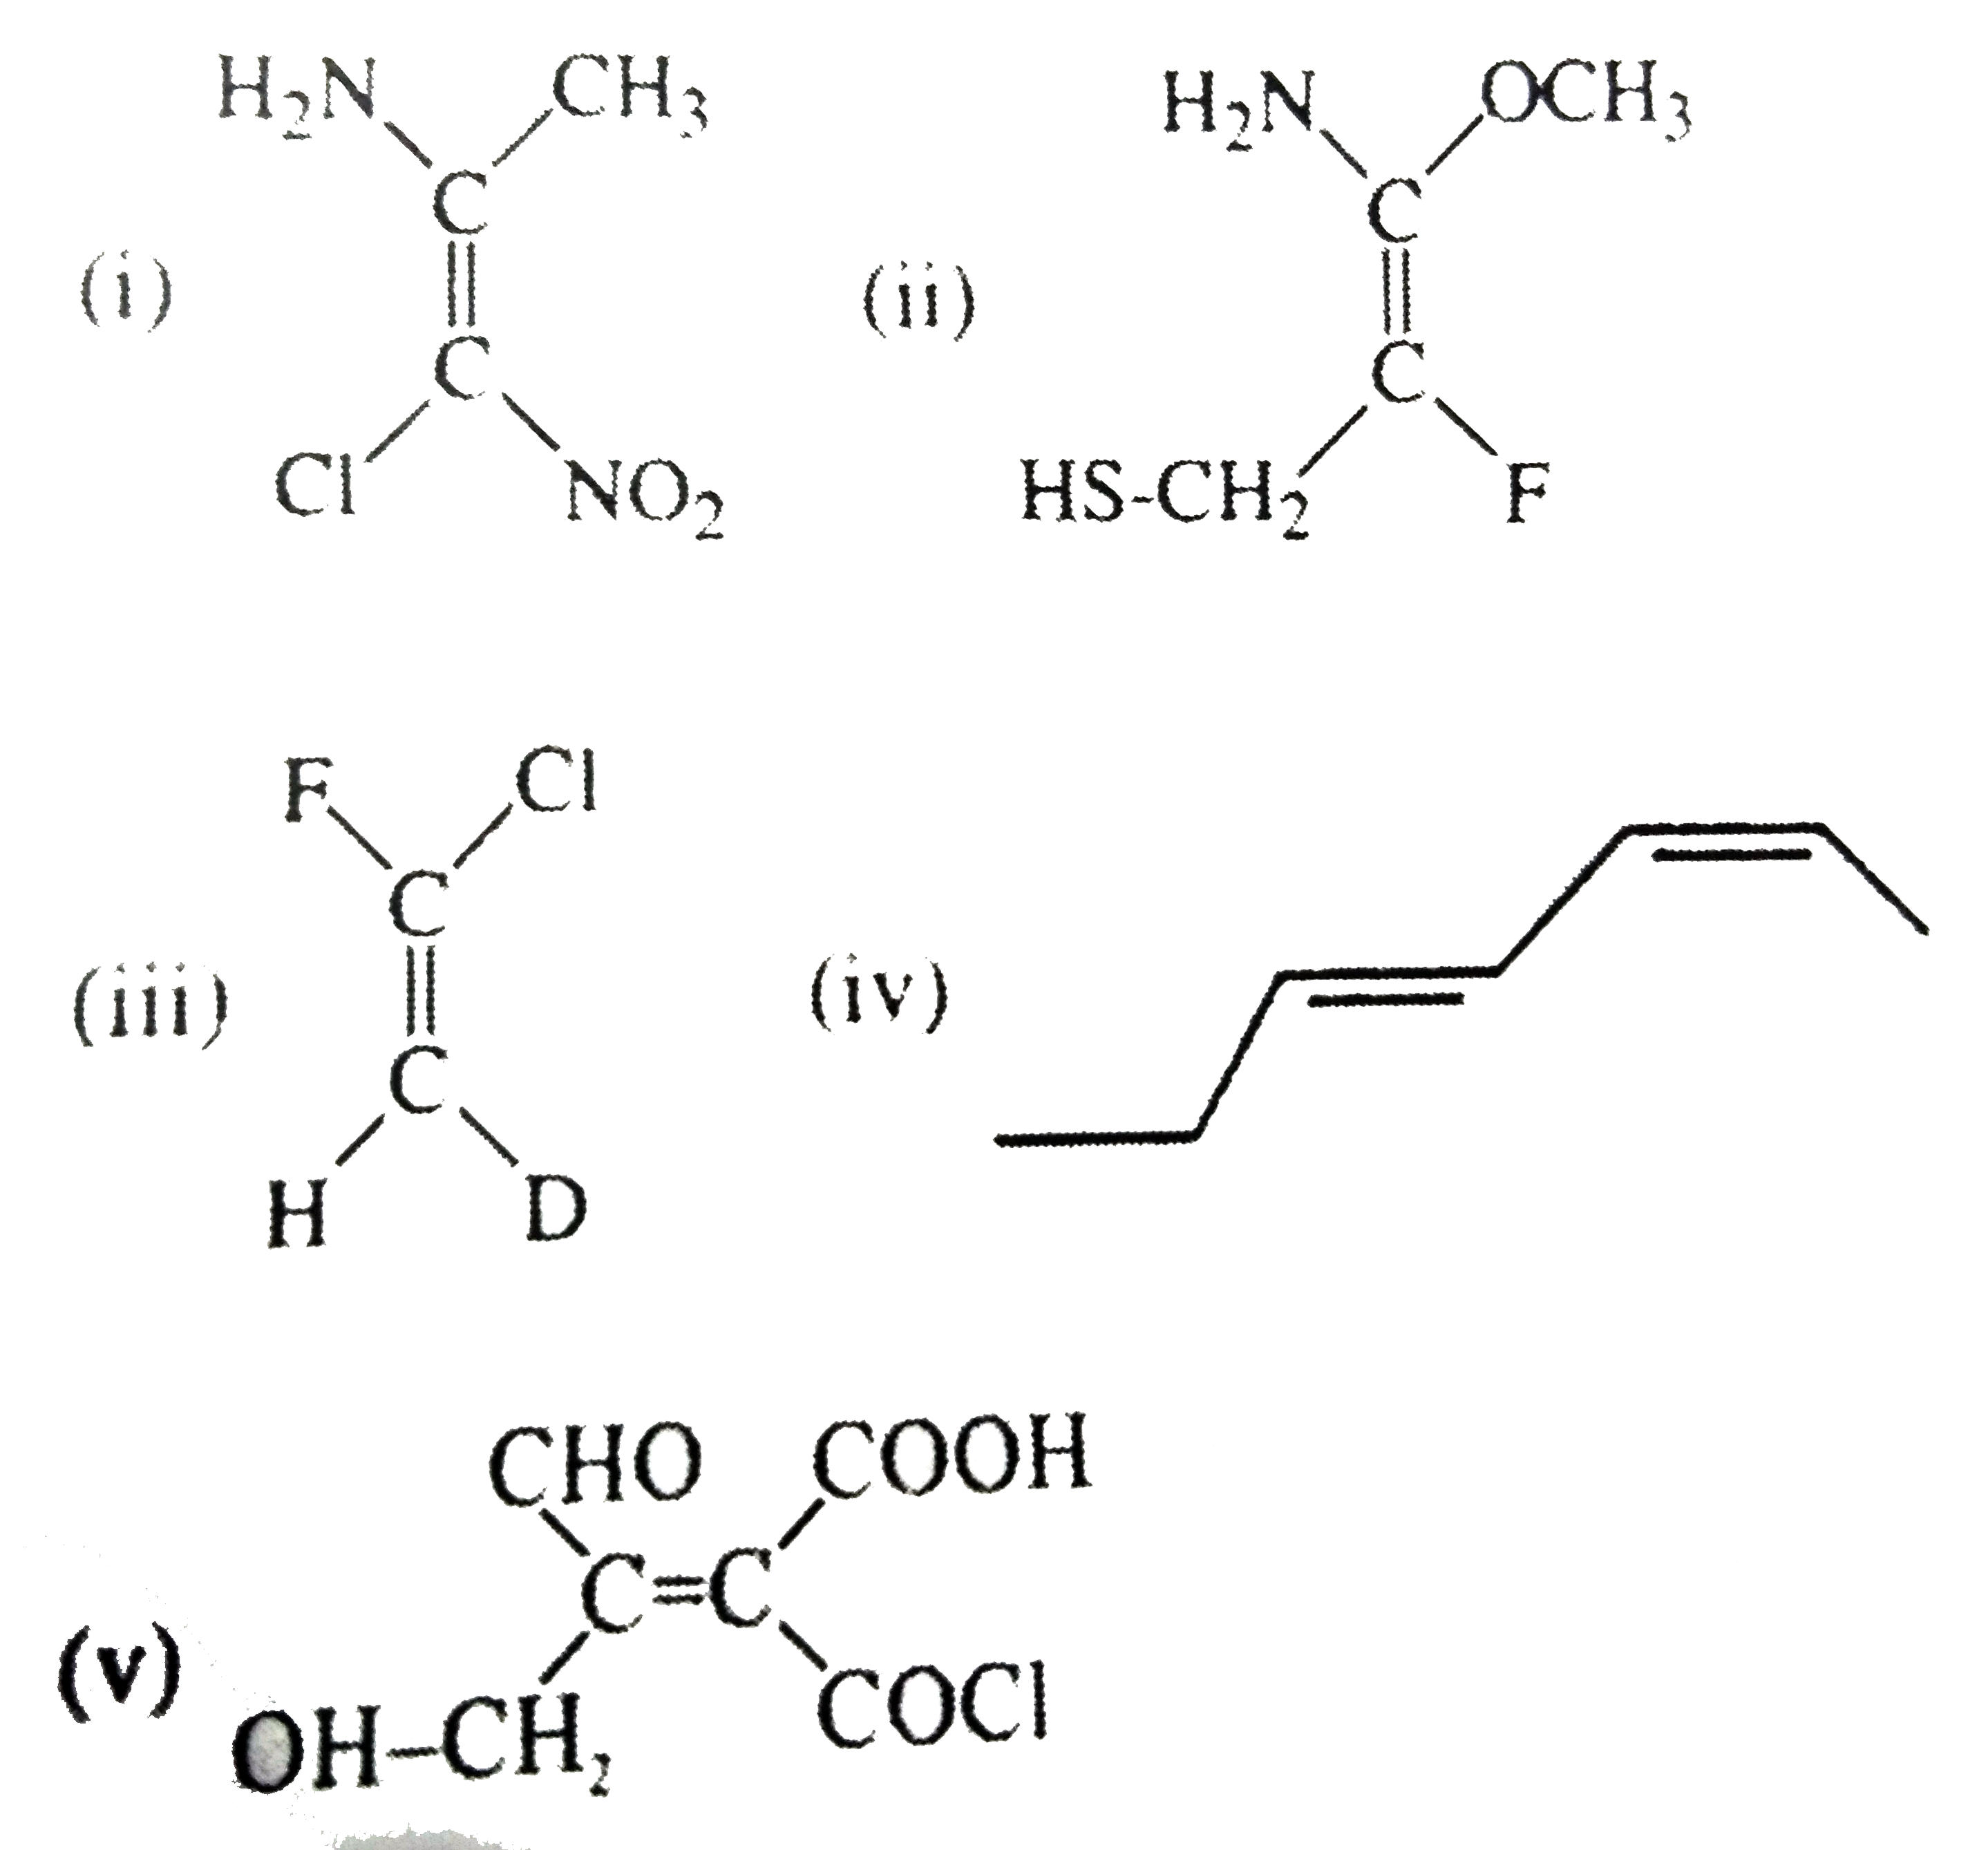 Assign the configuration E/Z to the following compounds.